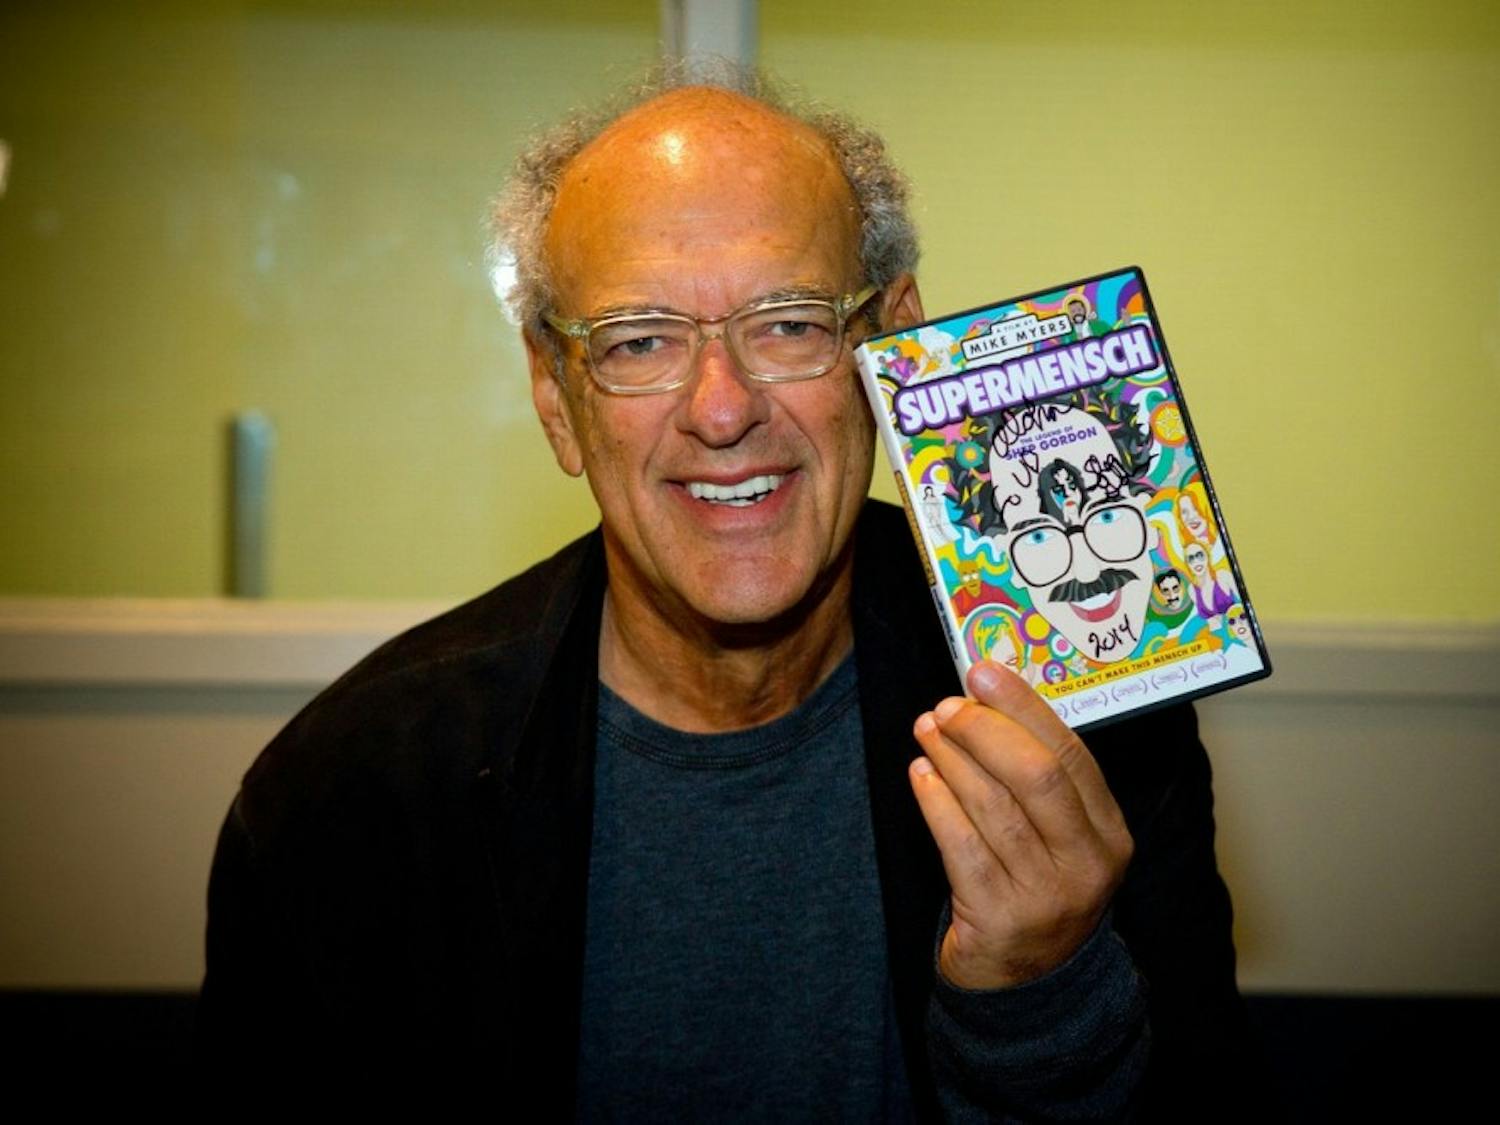 Retired music mogul Shep Gordon holds a copy of his documentary, which Mike Myers made about his life. Gordon often refers to his time at UB as some of the greatest years of his life.